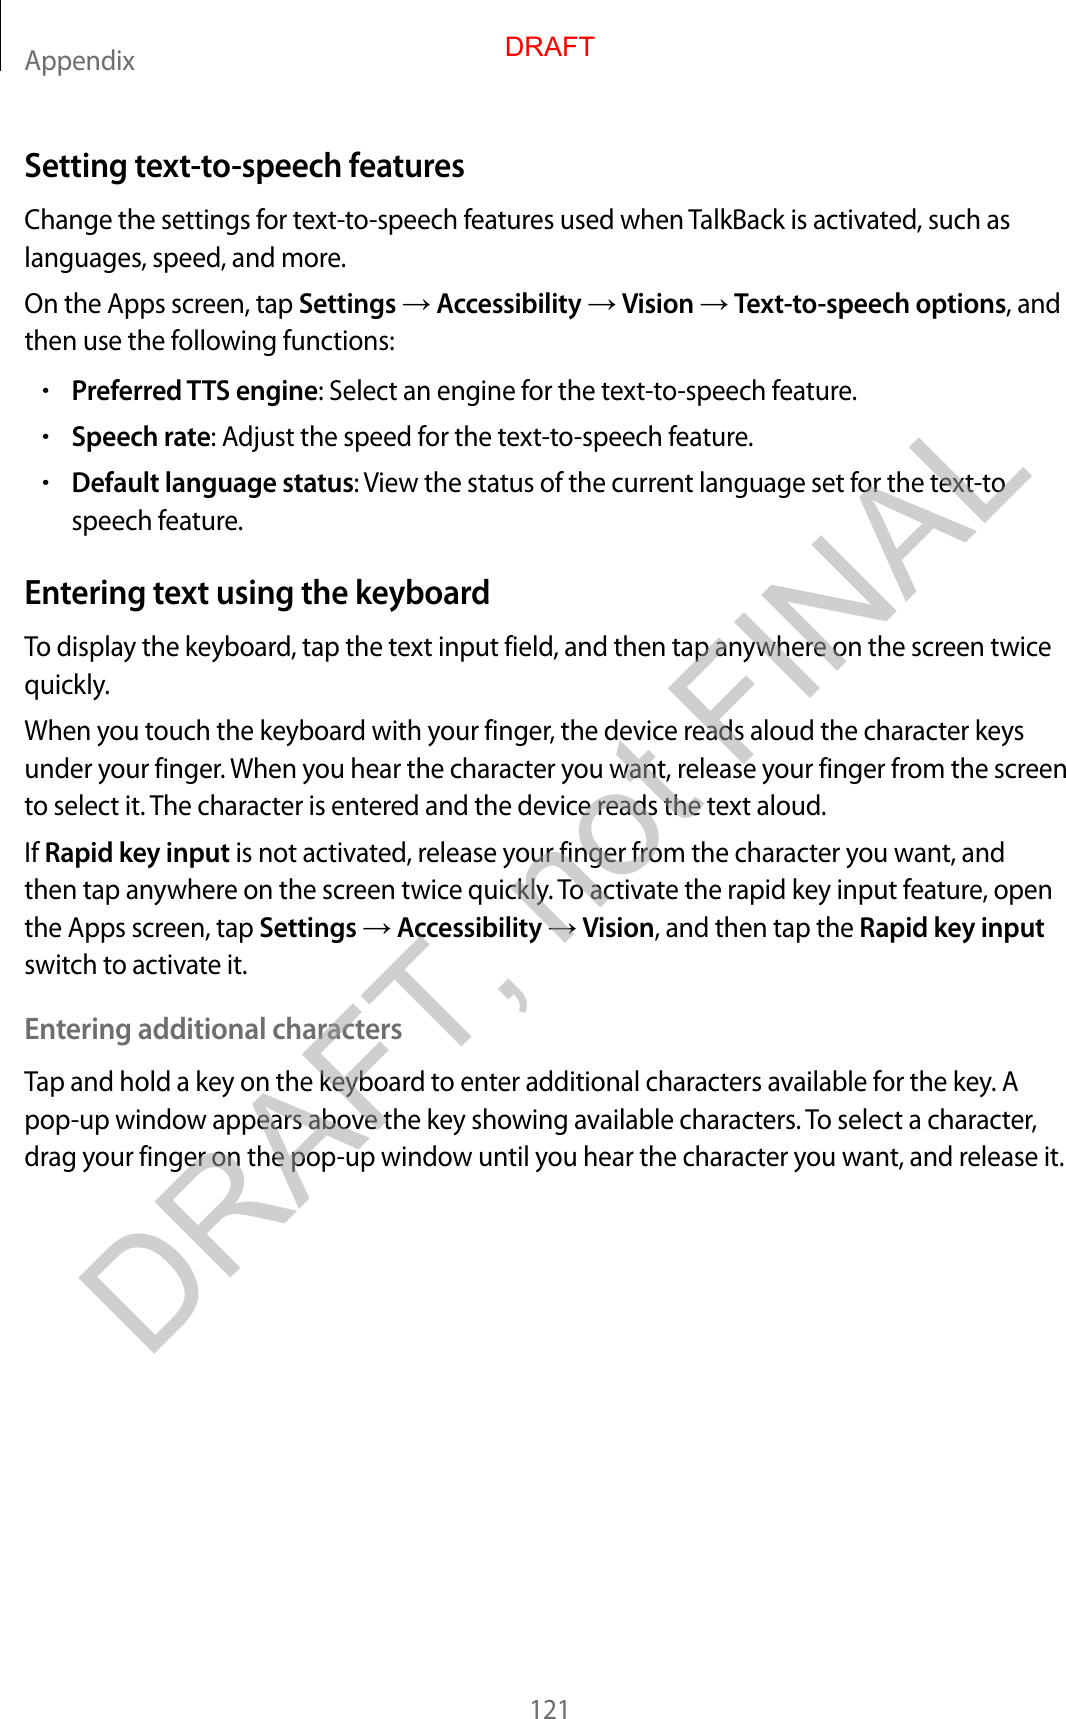 Appendix121Setting text-to-speech featur esChange the settings for t ext-to-speech featur es used when TalkBack is activated , such as languages, speed , and mor e .On the Apps screen, tap Settings  Accessibility  Vision  Text-to-speech options, and then use the follo wing functions:•Preferred TTS engine: Select an engine f or the t ext-to-speech featur e .•Speech rat e: Adjust the speed f or the t ext-to-speech featur e .•Default language status: View the status of the curr ent language set for the text-to speech featur e.Entering t e xt using the keyboardTo display the keyboar d , tap the text input field, and then tap an ywhere on the scr een twice quickly.When you t ouch the keyboar d with y our finger, the device reads aloud the character keys under your finger. When you hear the character you wan t, r elease y our finger fr om the scr een to select it. The character is enter ed and the devic e r eads the te xt aloud.If Rapid key input is not activated, r elease y our finger fr om the character y ou want , and then tap anywhere on the scr een twice quickly. To activat e the rapid key input f ea tur e , open the Apps screen, tap Settings  Accessibility  Vision, and then tap the Rapid key input switch to activate it.Entering additional char actersTap and hold a key on the keyboard to ent er additional characters av ailable f or the key. A pop-up window appears above the key showing a v ailable characters. To select a character, drag your finger on the pop-up window until y ou hear the character y ou want , and r elease it.DRAFT, not FINALDRAFT